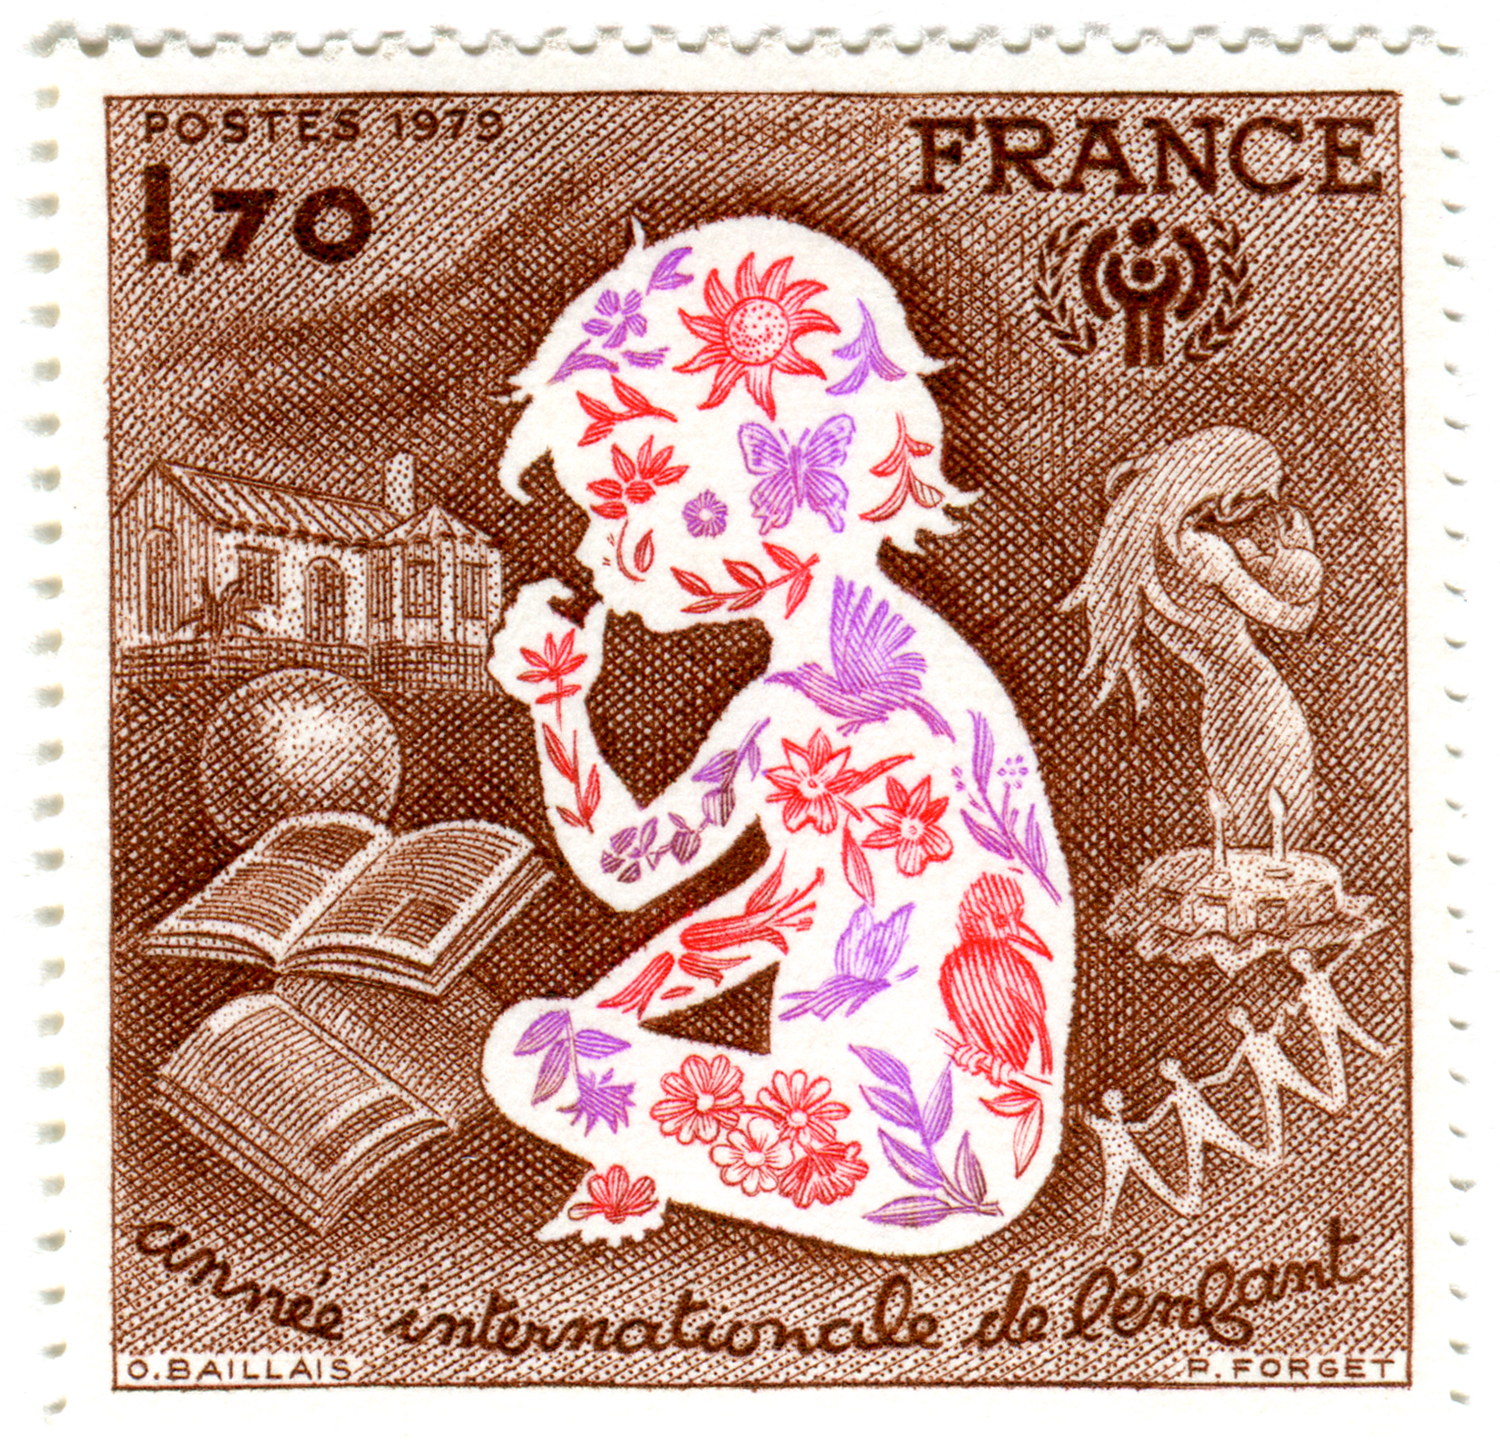 France postage stamp: Year of the Child